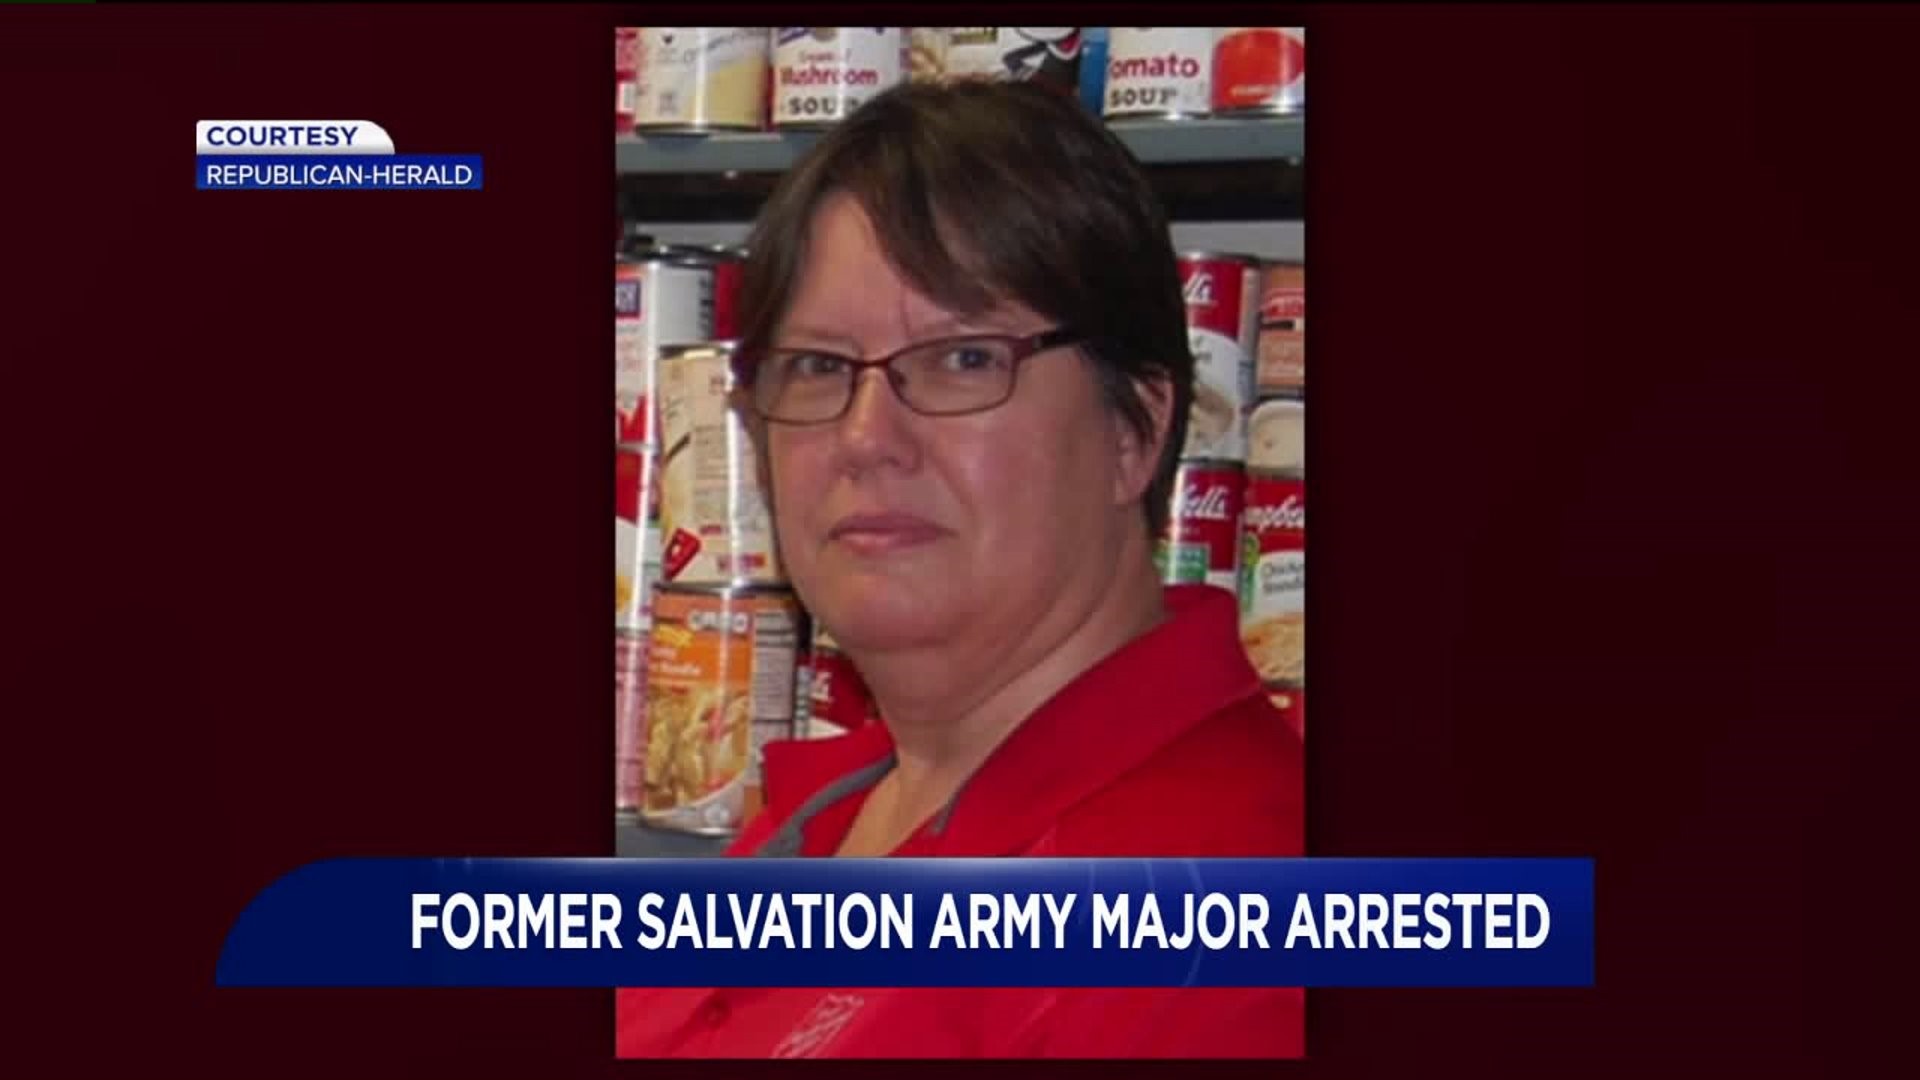 Salvation Army Officer Arrested After More than 100,000 Goes Missing